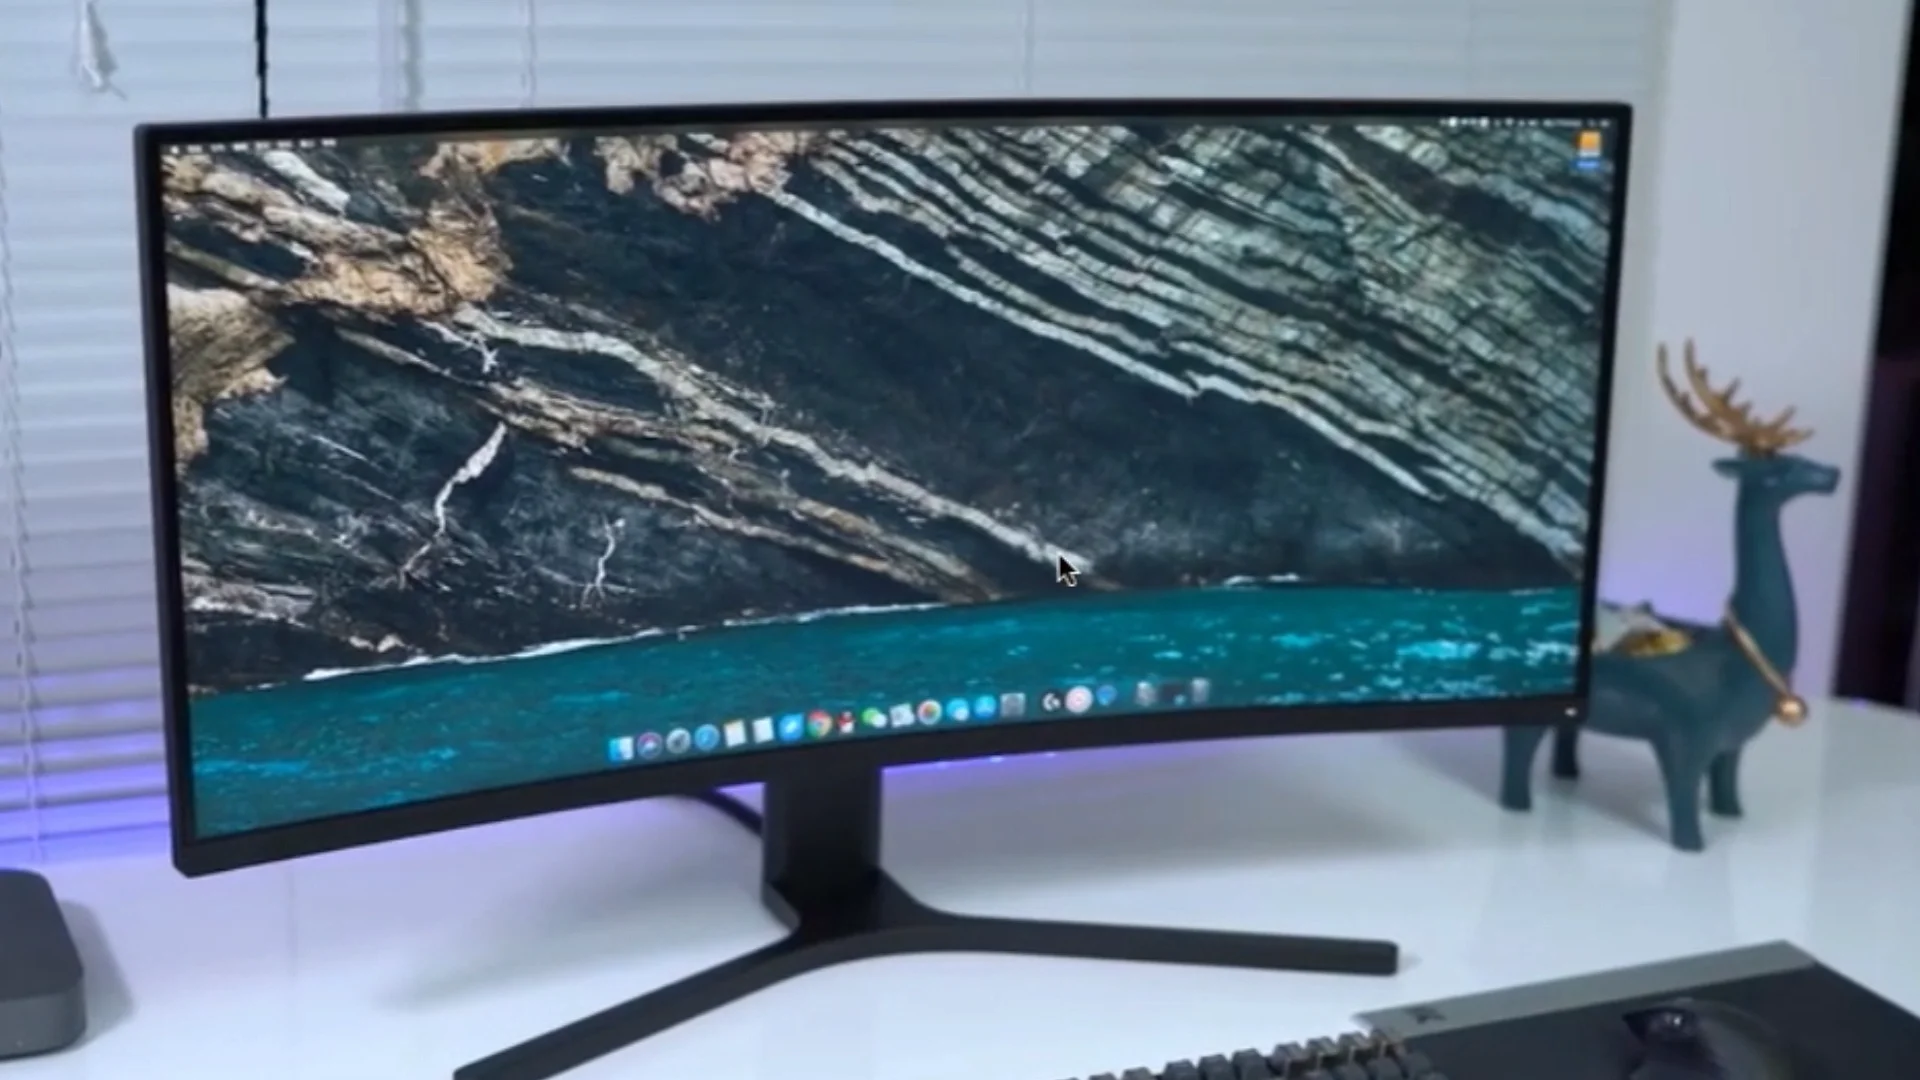 Xiaomi 144hz Curved Gaming Monitor